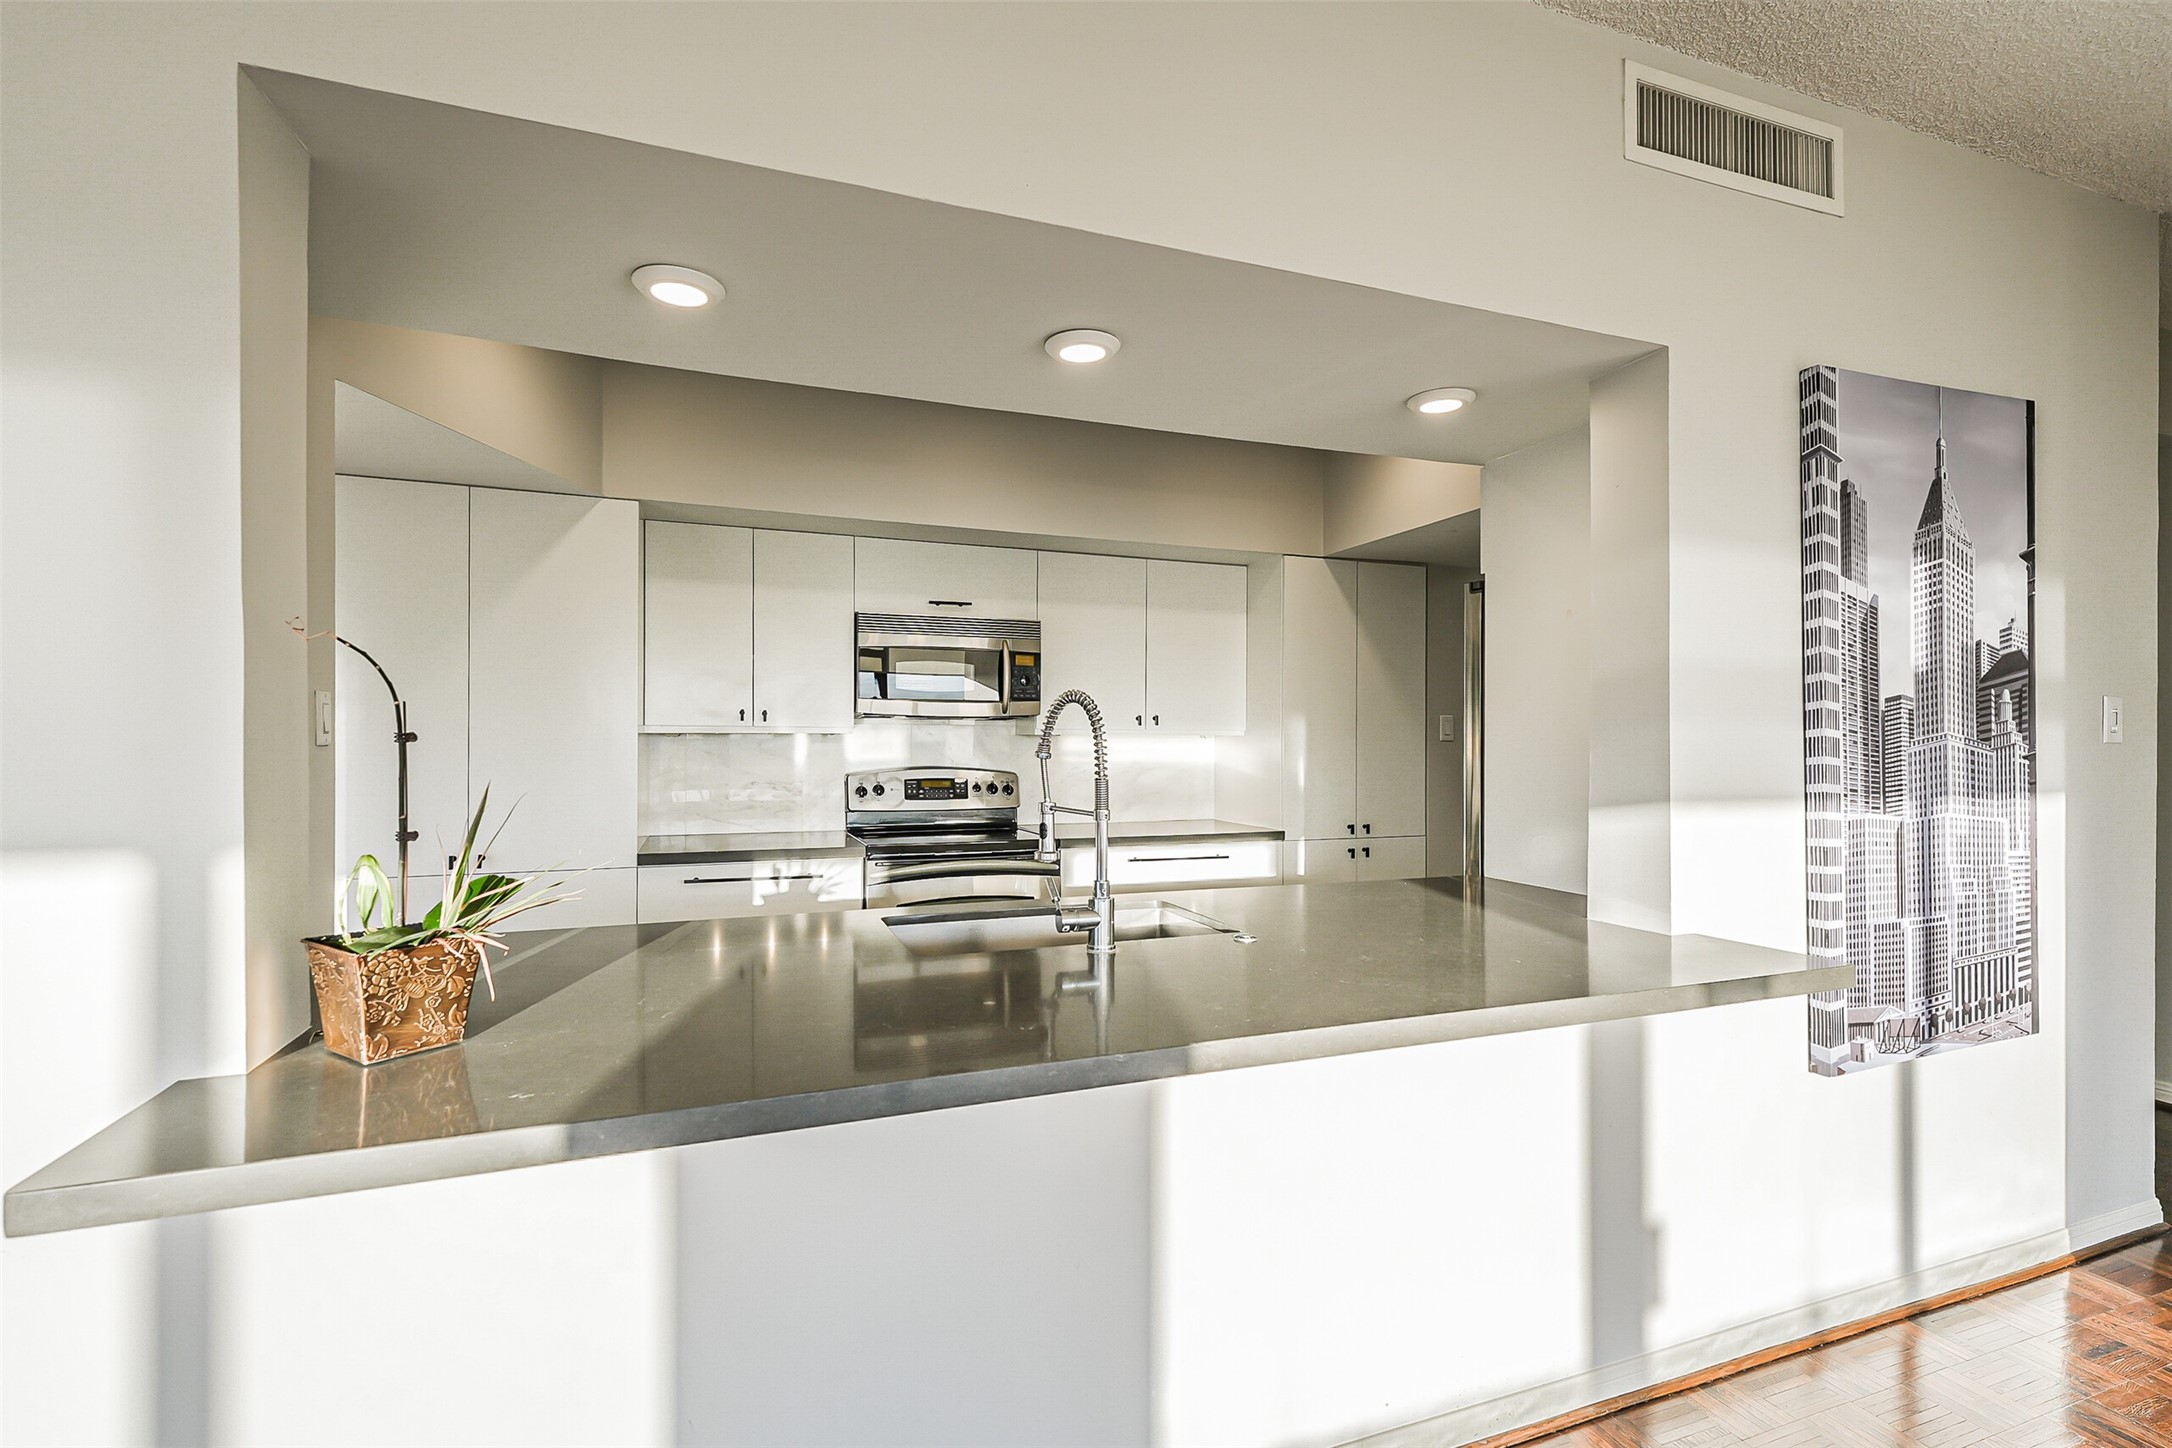 The beautifully updated kitchen opens to the living/dining area.  Light flows into the kitchen from the expansive glass windows creating wonderful views.